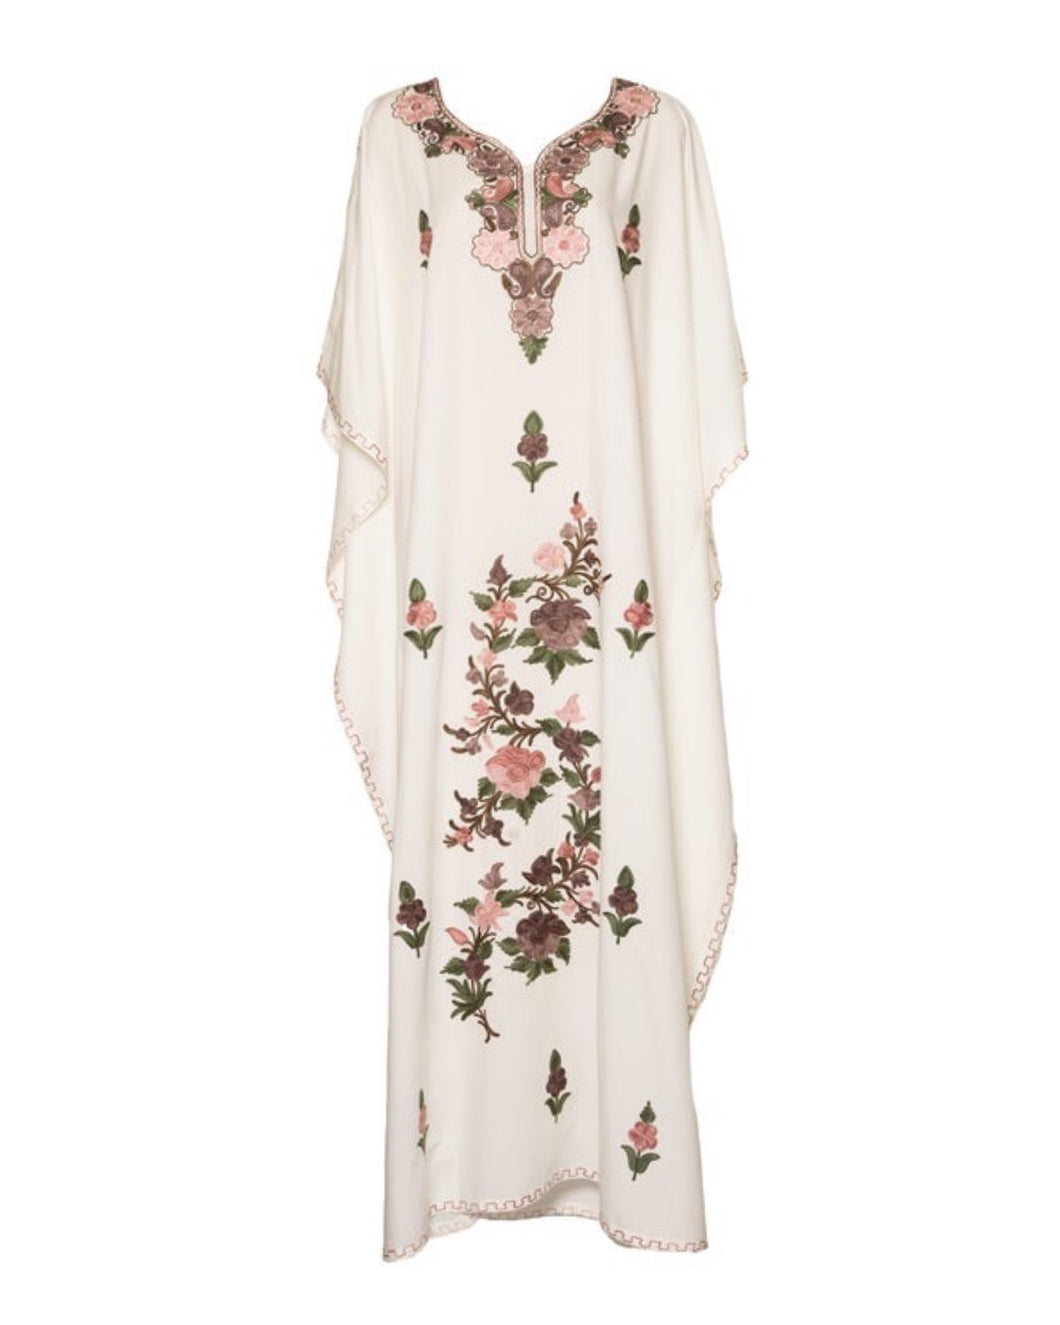 Kaftan Dress (White with Peach Hand Embroidered Flowers)